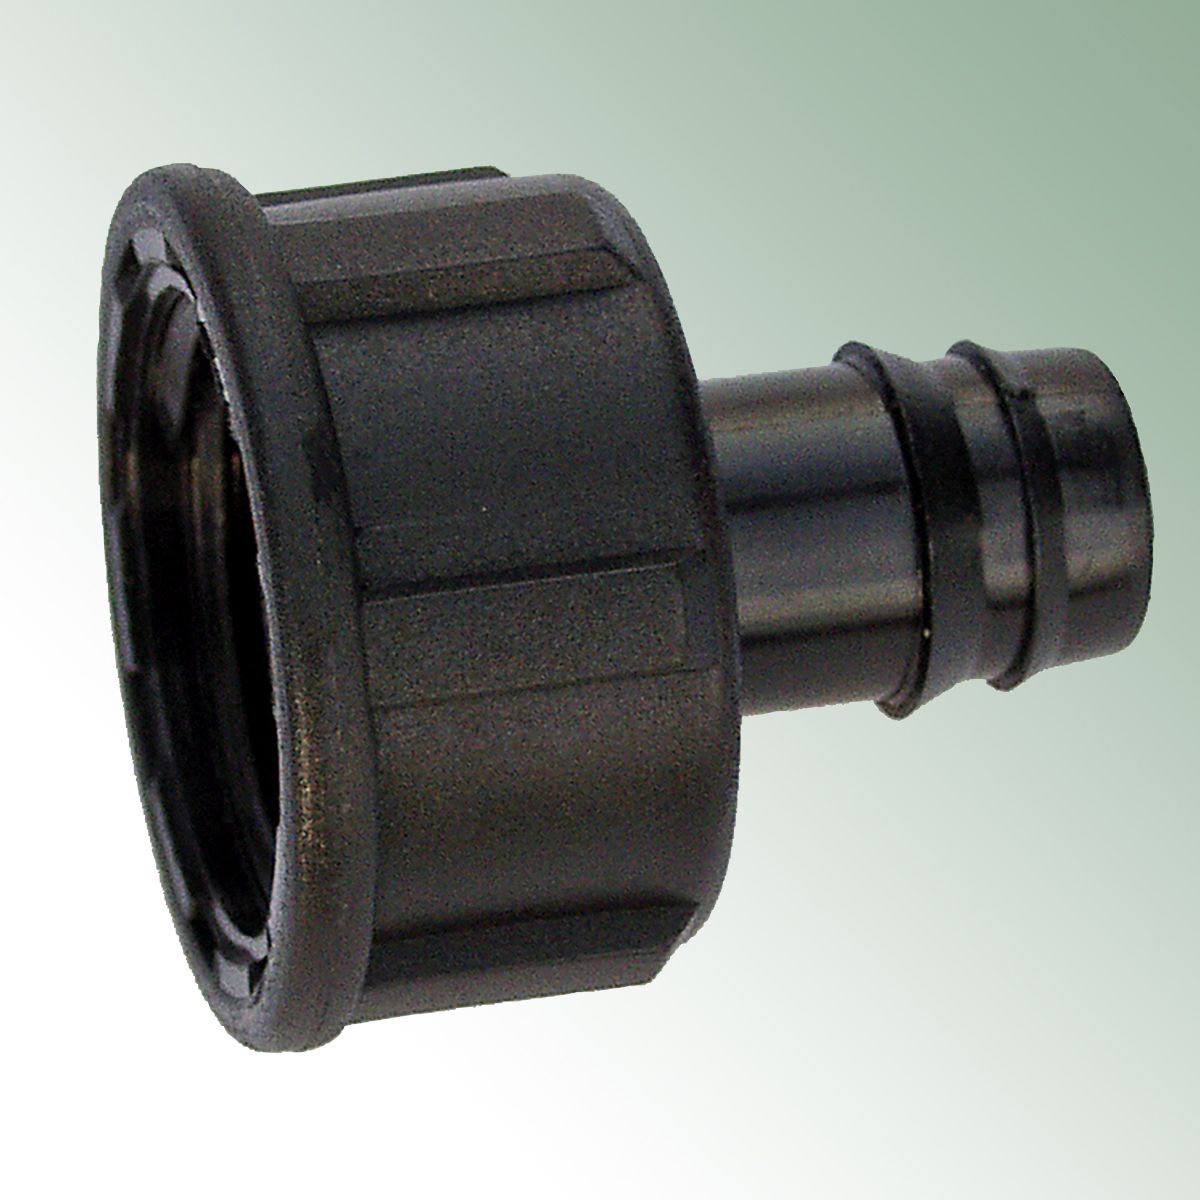 Connector 20 mm x 3/4 Female Thread for Pipe